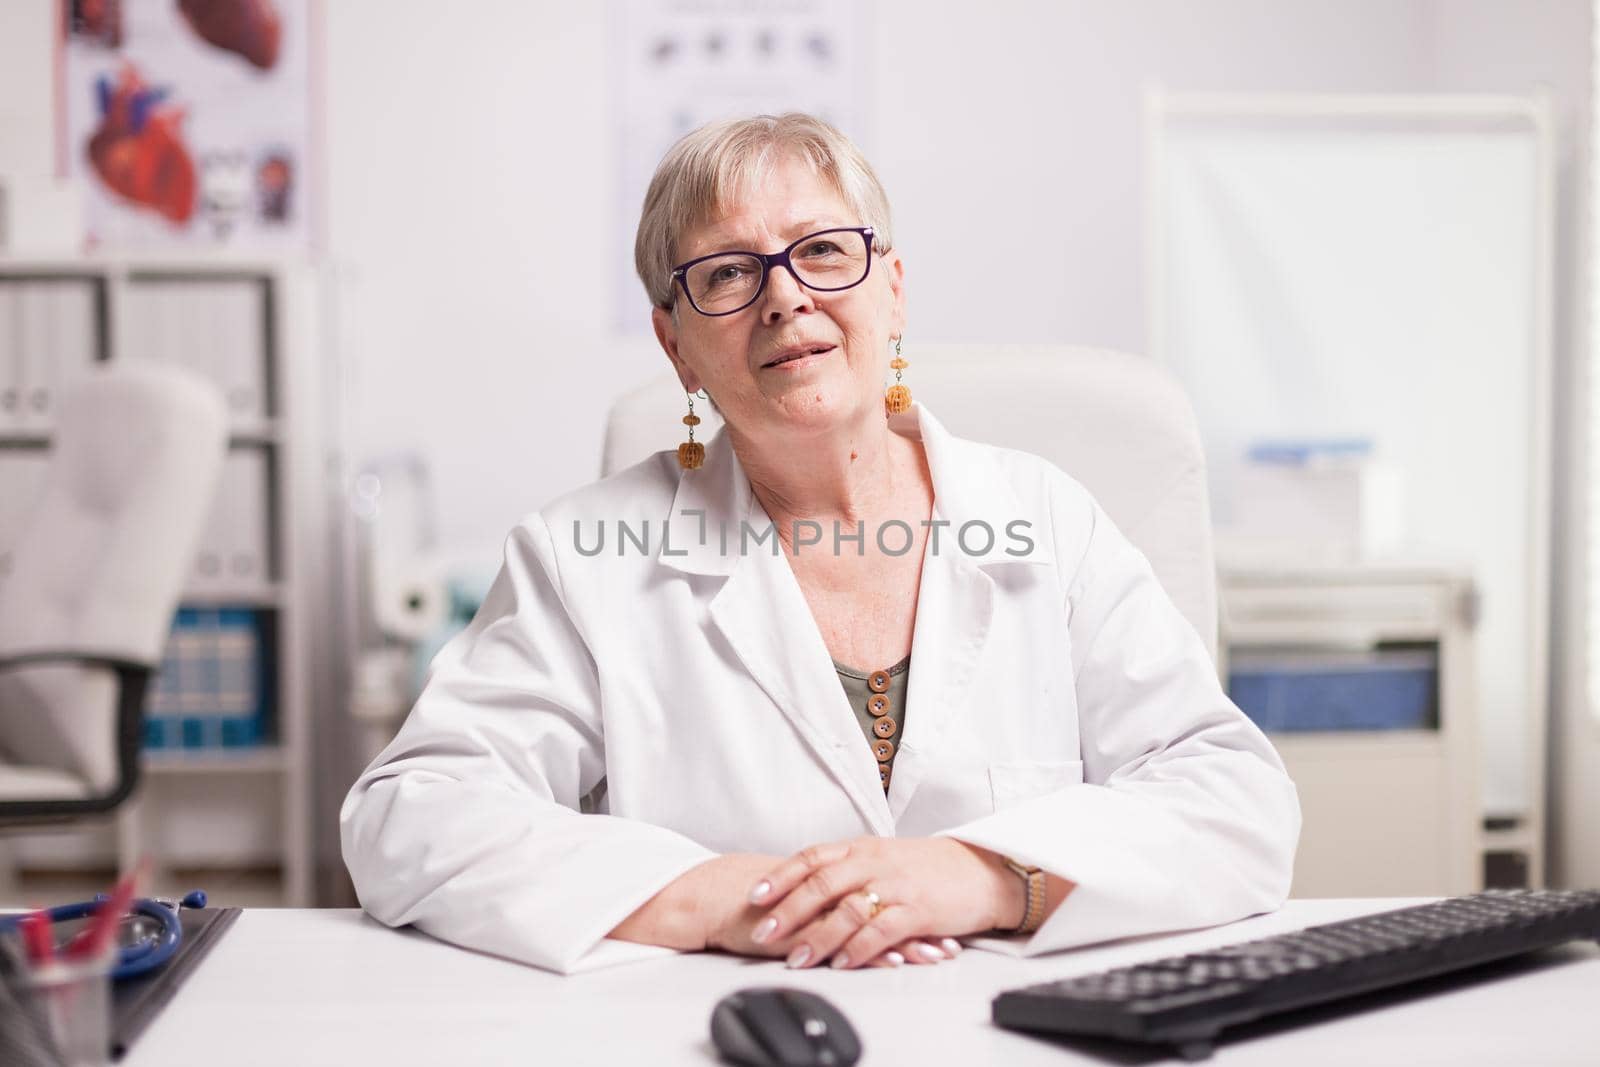 Medic with grey hair wearing coat in clinic cabinet sitting at desk.